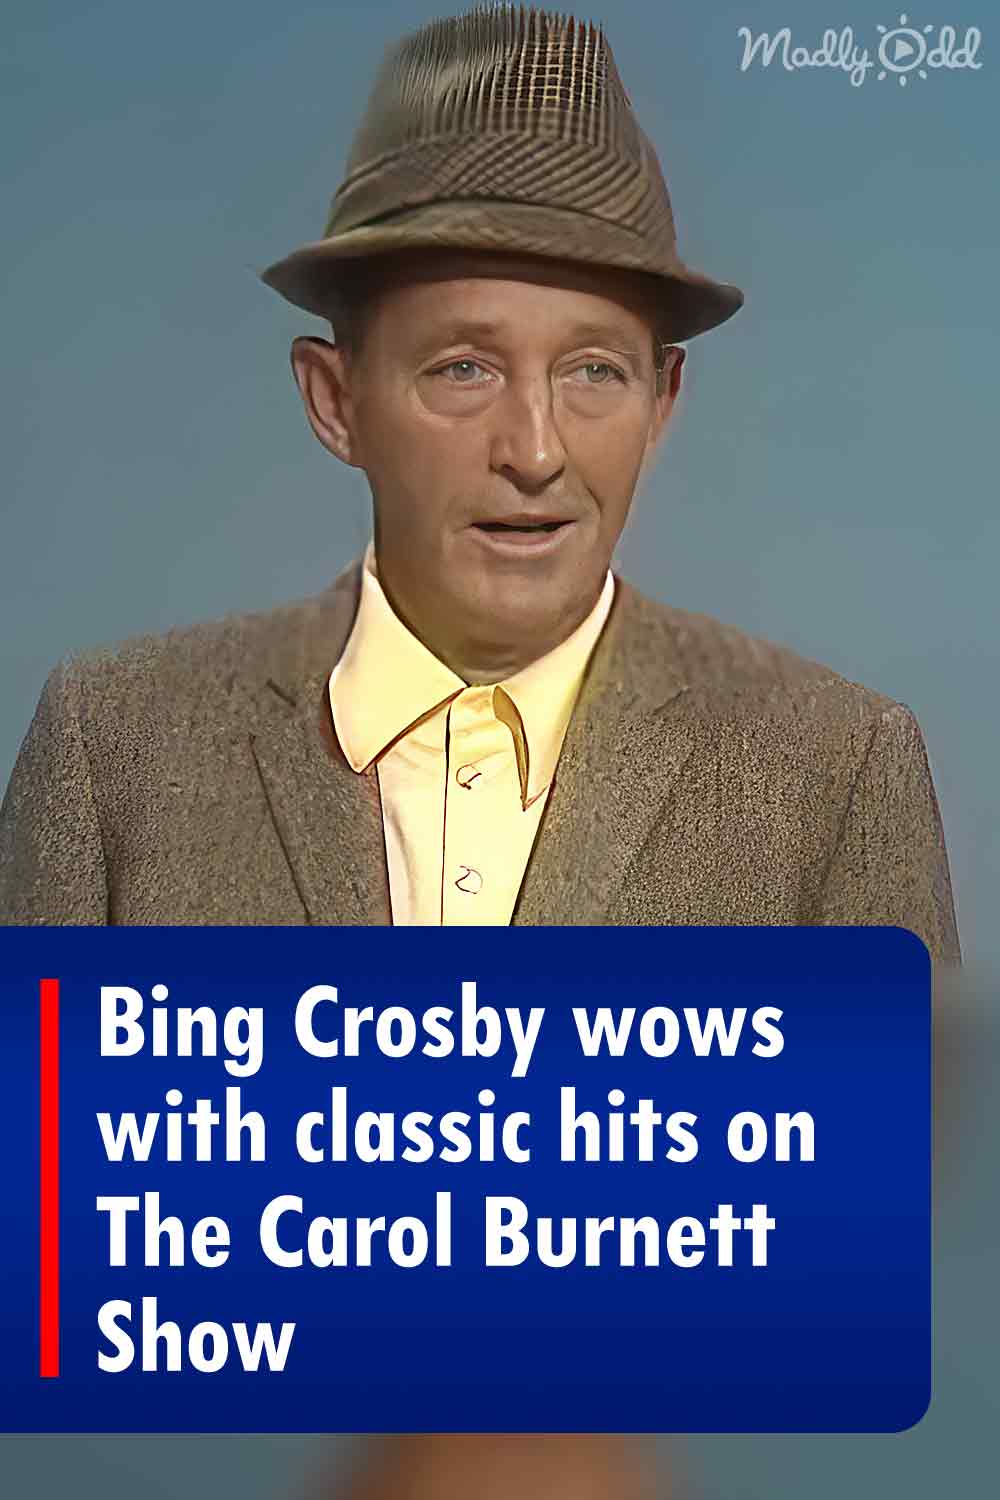 Bing Crosby wows with classic hits on The Carol Burnett Show